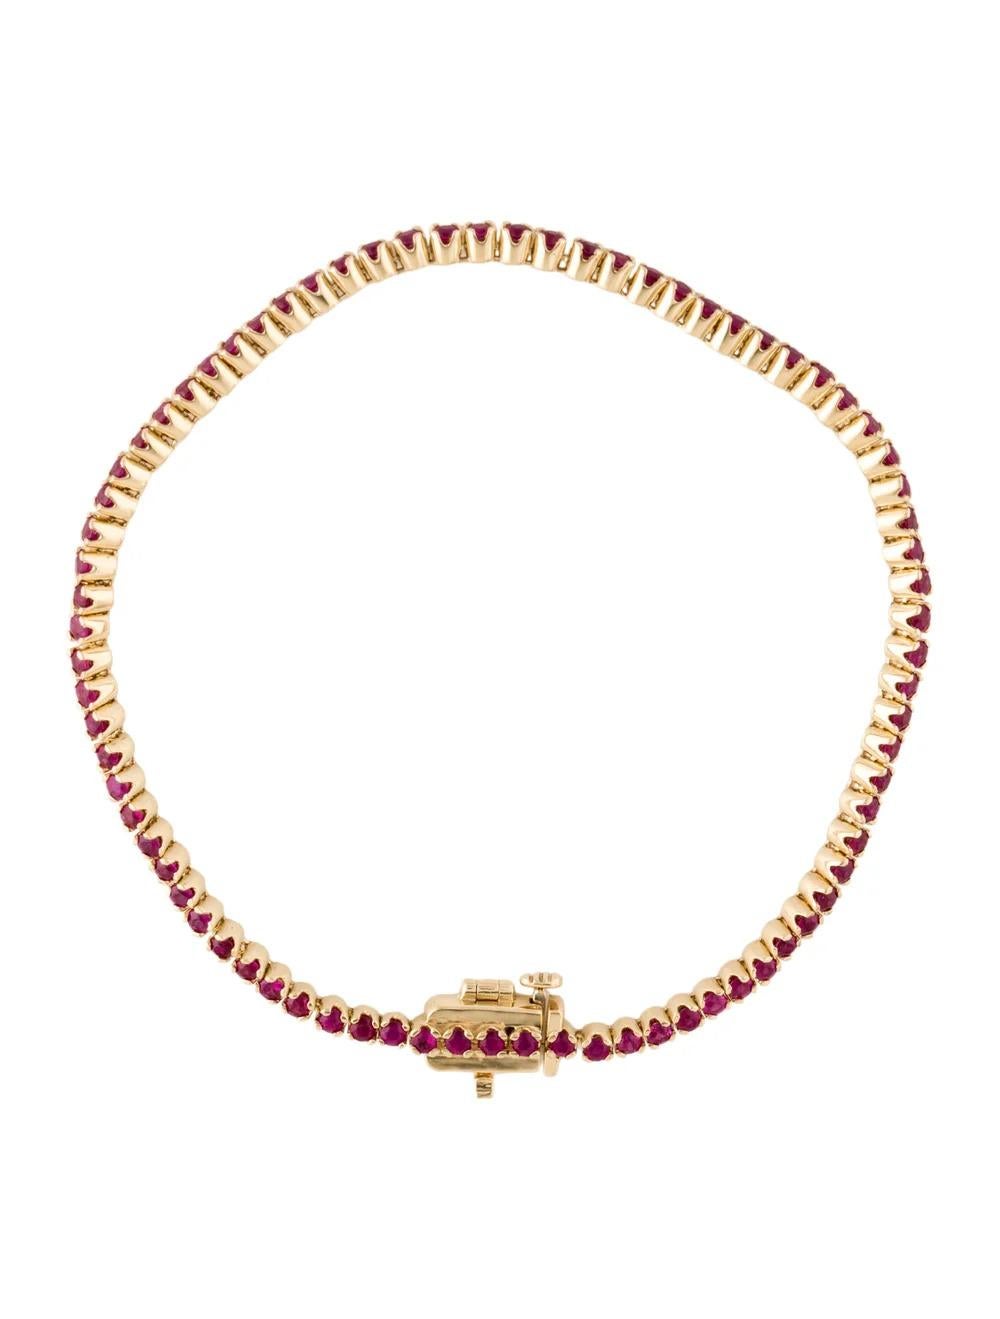 14K Gold Ruby Link Bracelet - Timeless Design, Stunning Ruby Gems, Jewelry Piece In New Condition For Sale In Holtsville, NY